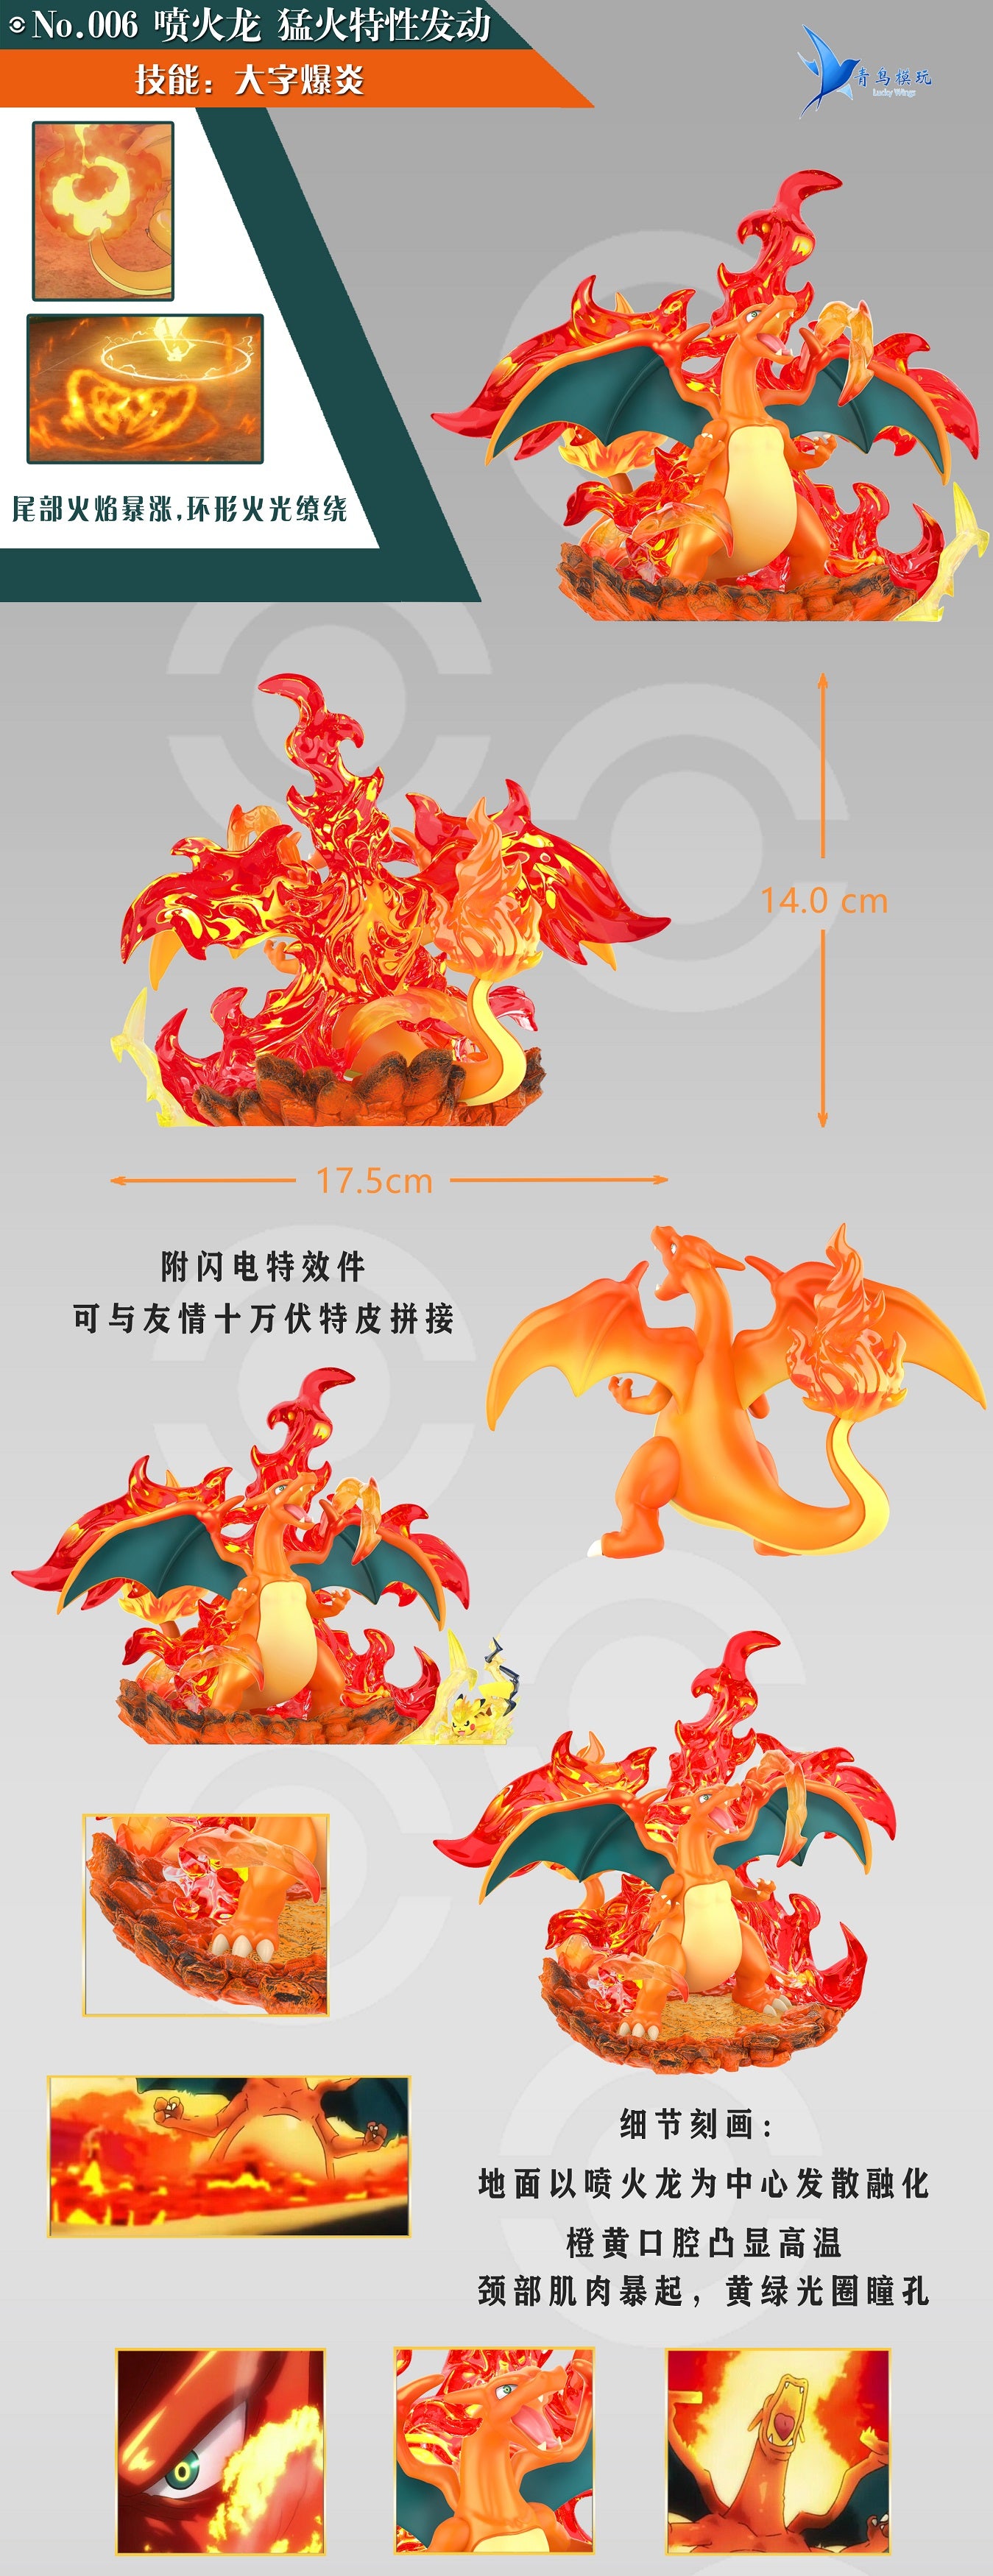 [PREORDER] 1/20 Scale World Figure [LUCKY WINGS] - Leon & Charizard